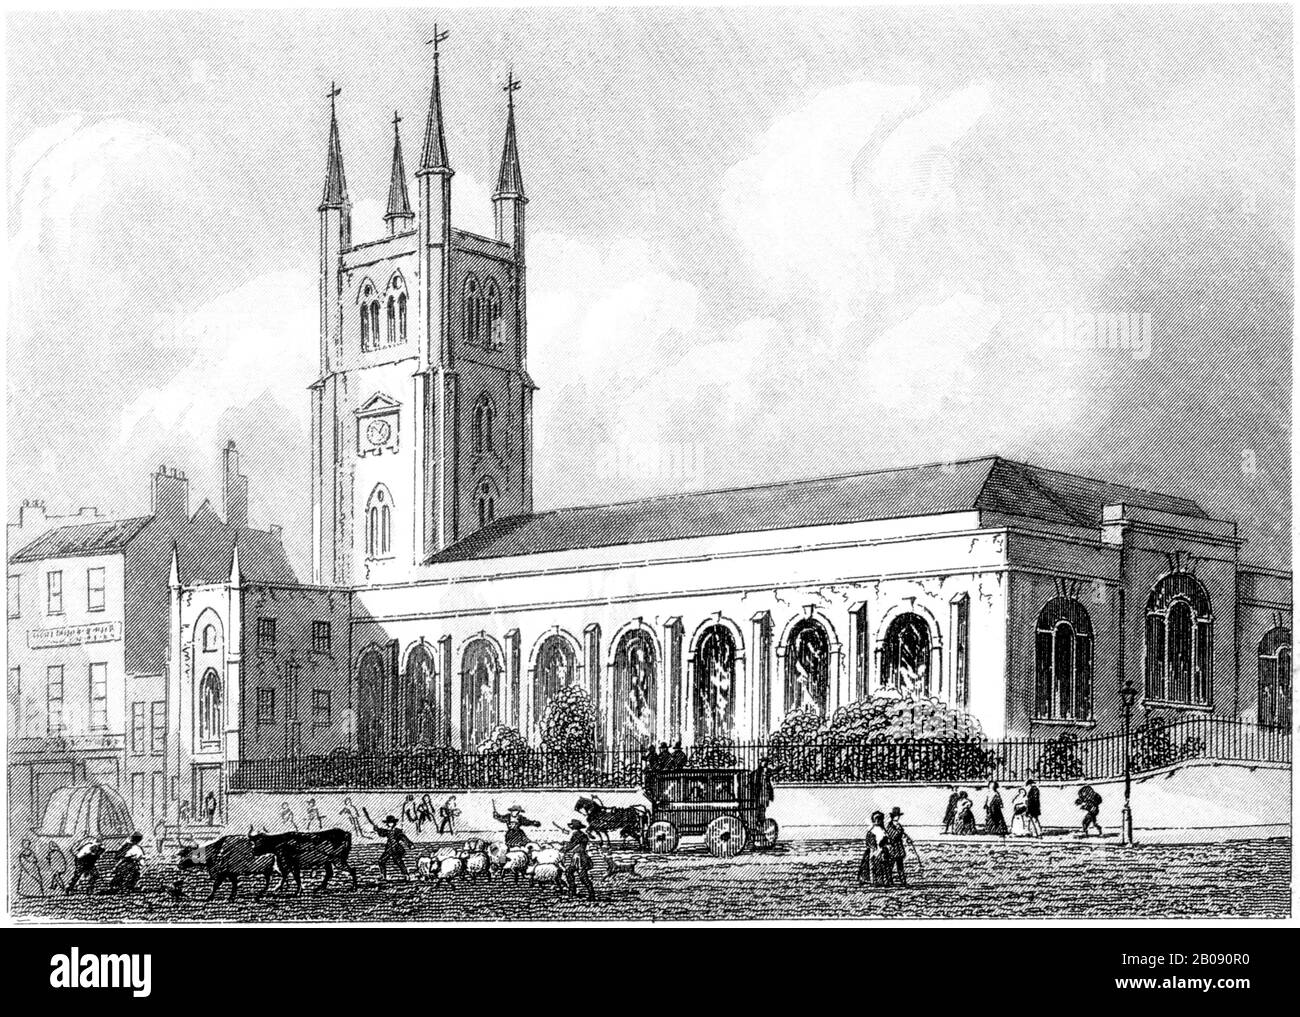 An engraving of St Sepulchre, London scanned at high resolution from a book printed in 1851. This image is believed to be free of all copyright. Stock Photo